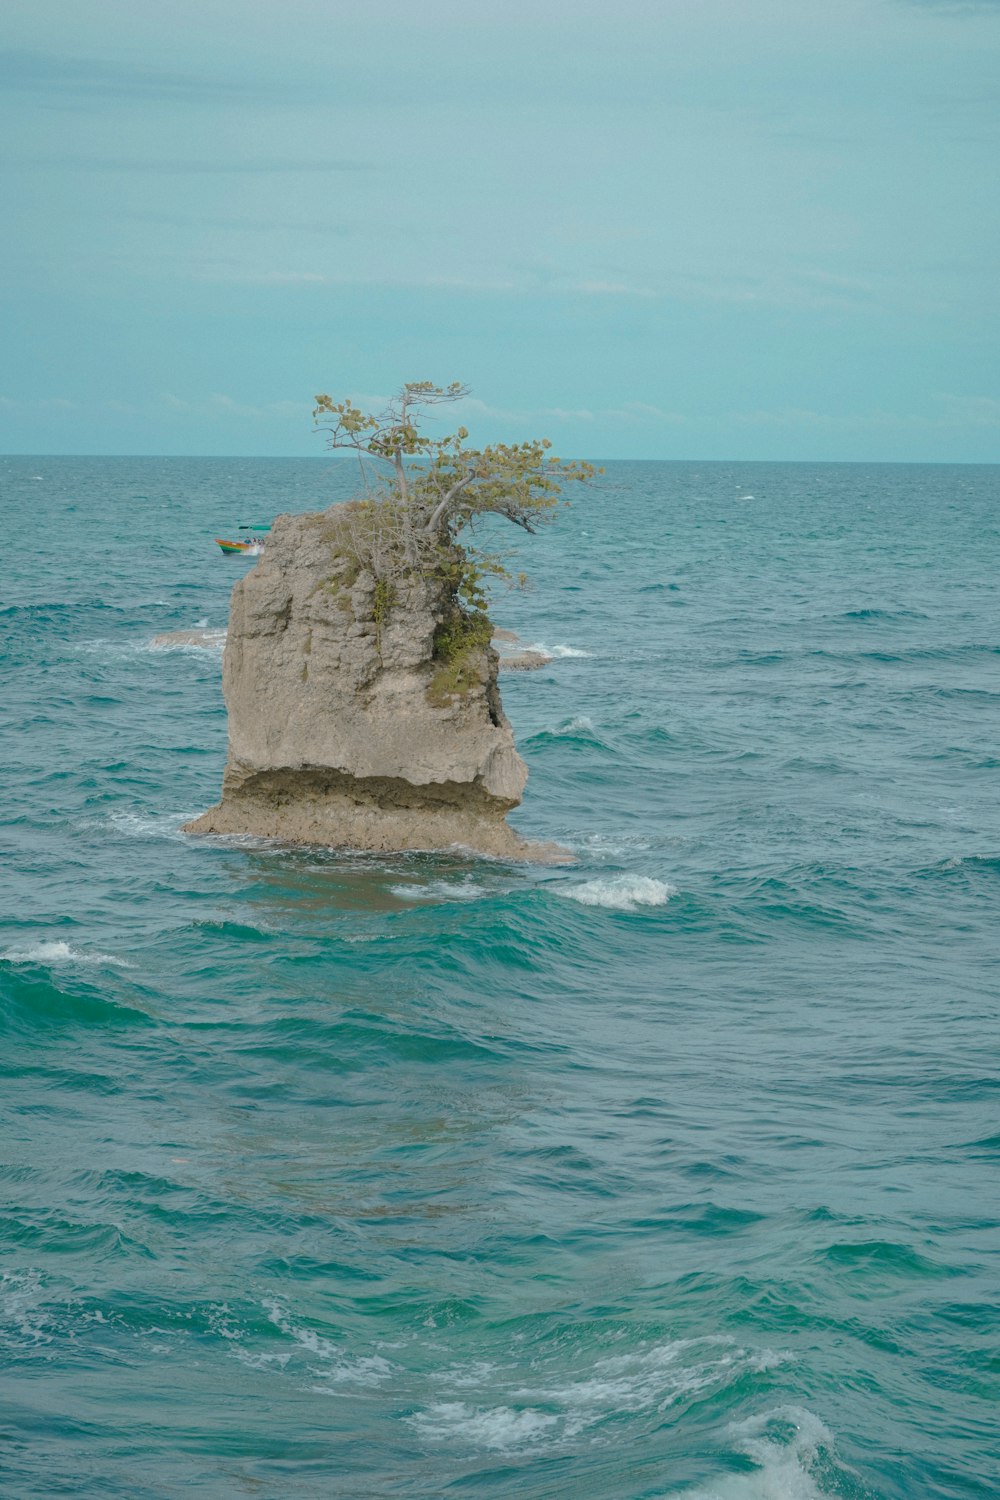 a lone tree growing on a rock in the middle of the ocean